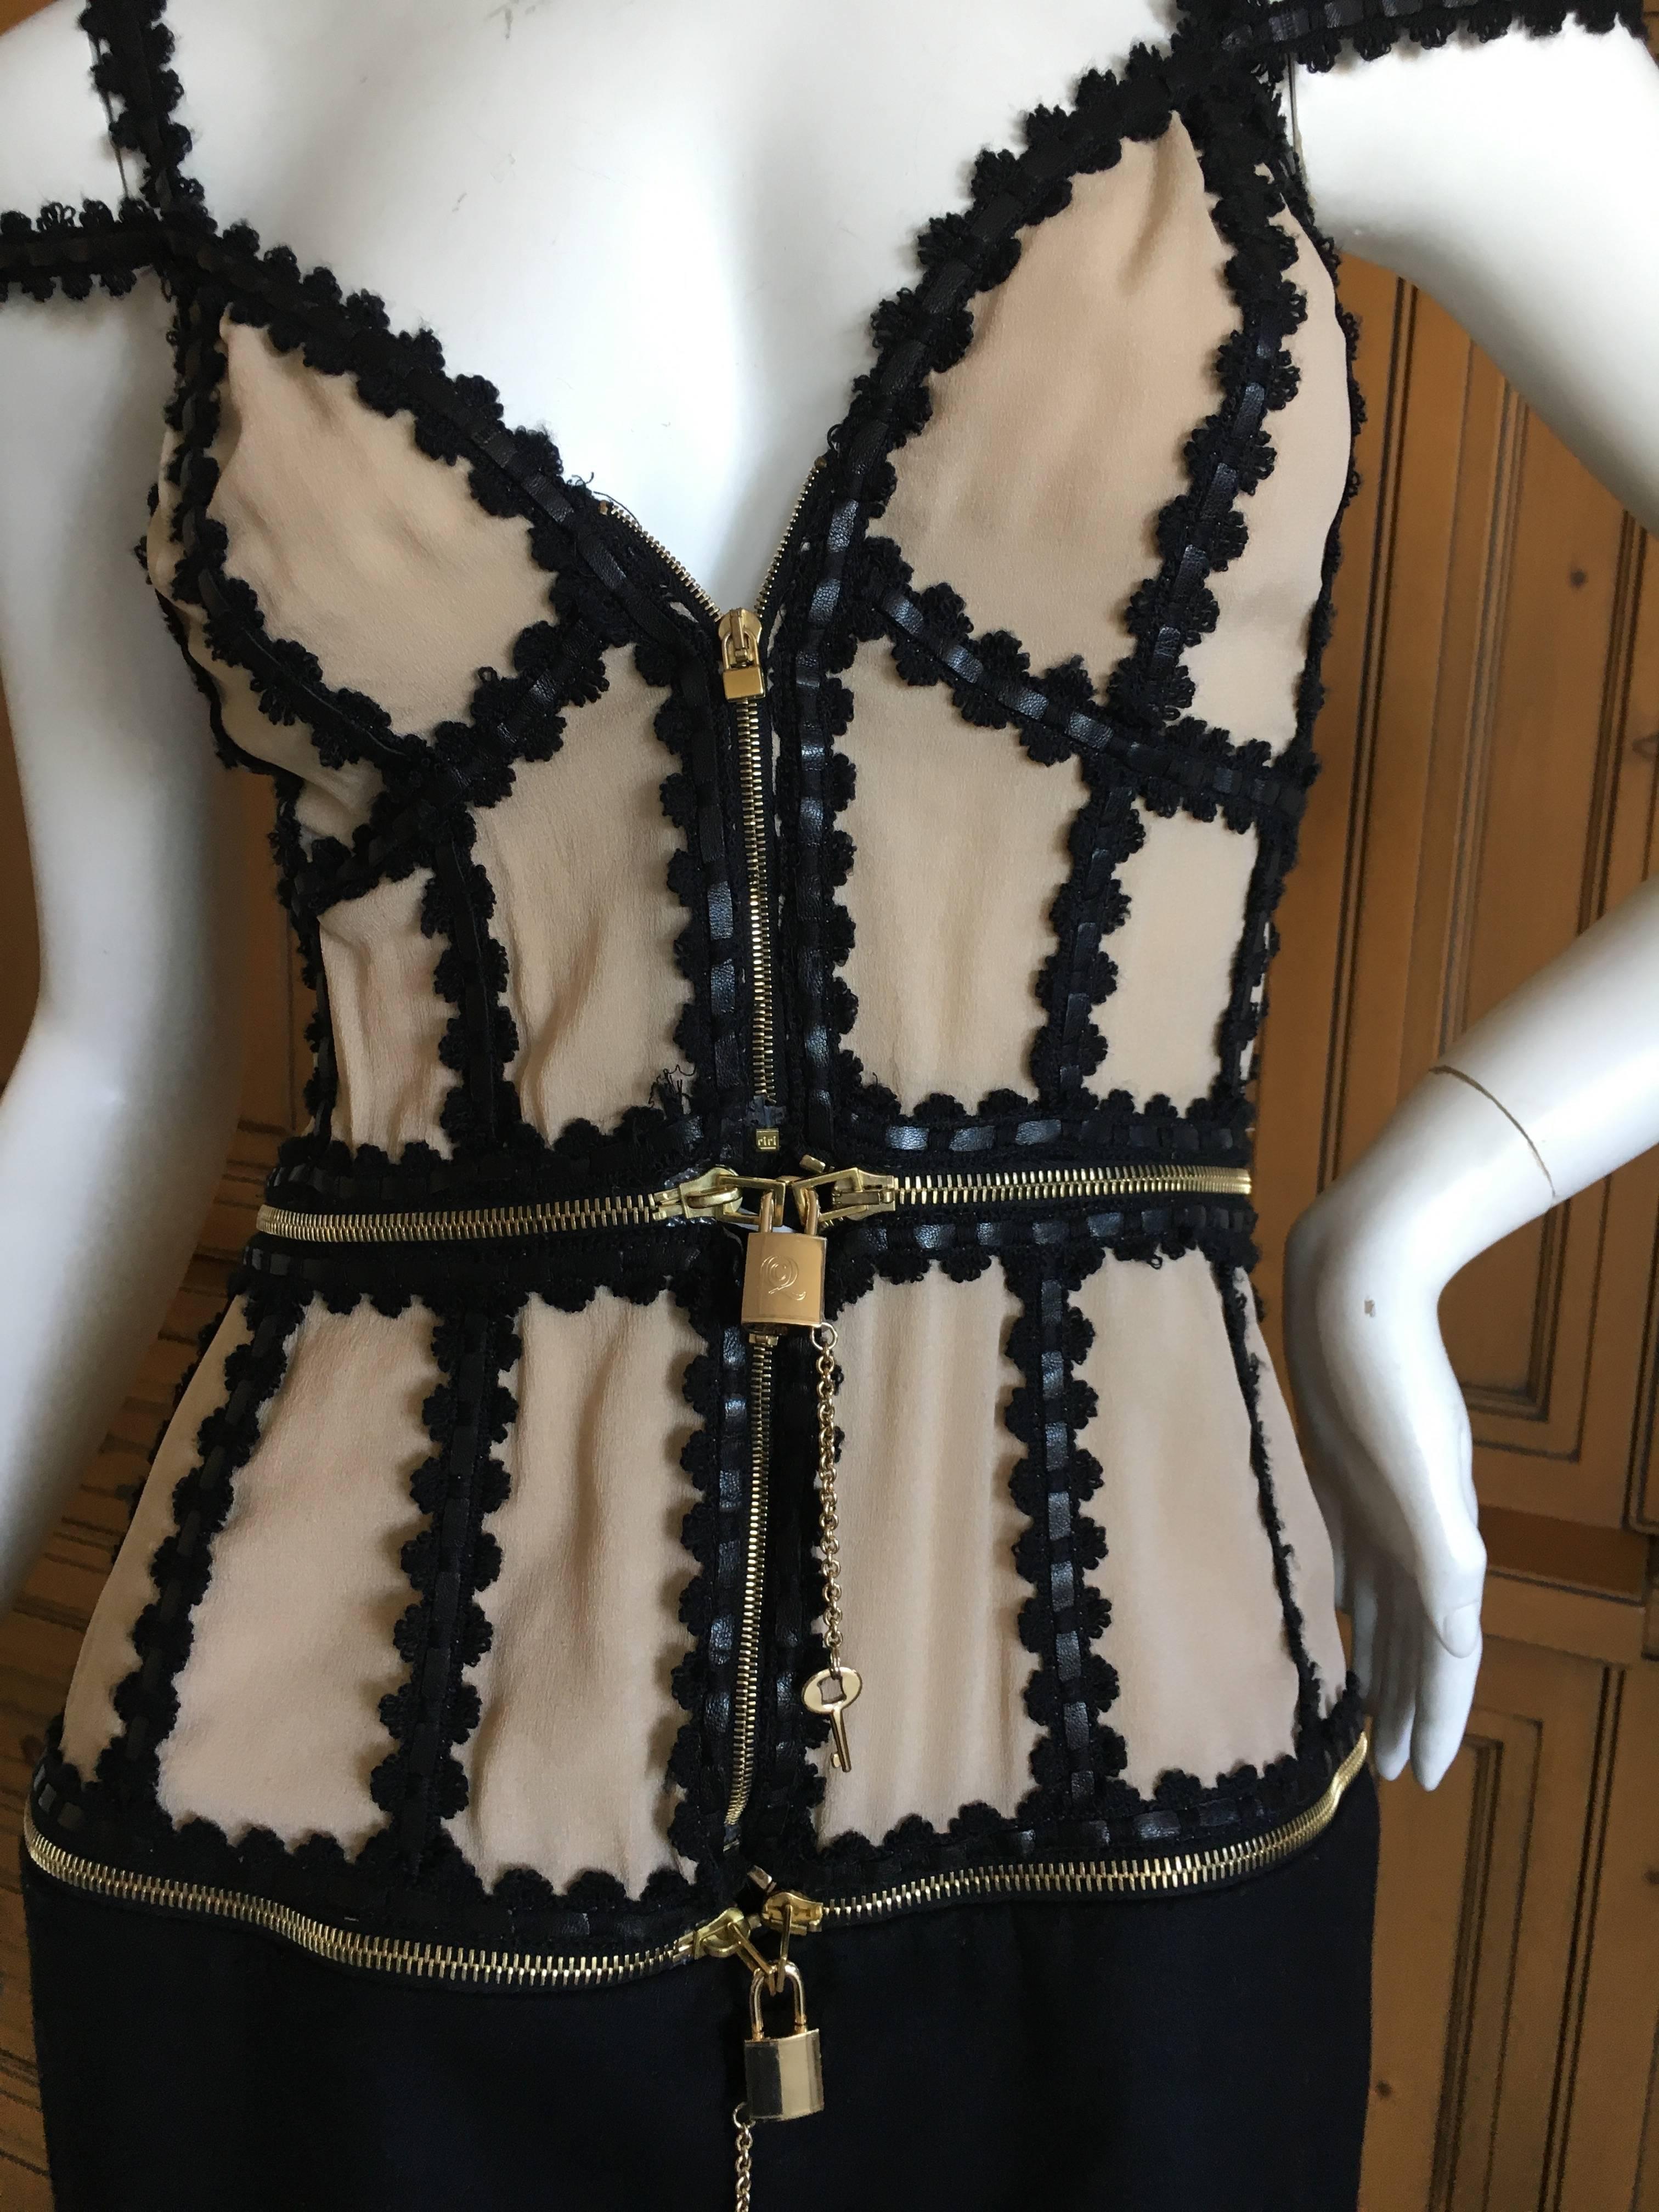 Alexander McQueen Rare Zip Apart Transformer Dress with All Locks & Keys.
This is pre death McQueen, and very rare to find with all the locks and keys intact.
This zips apart in to three separate pieces, fastened together with working locks &